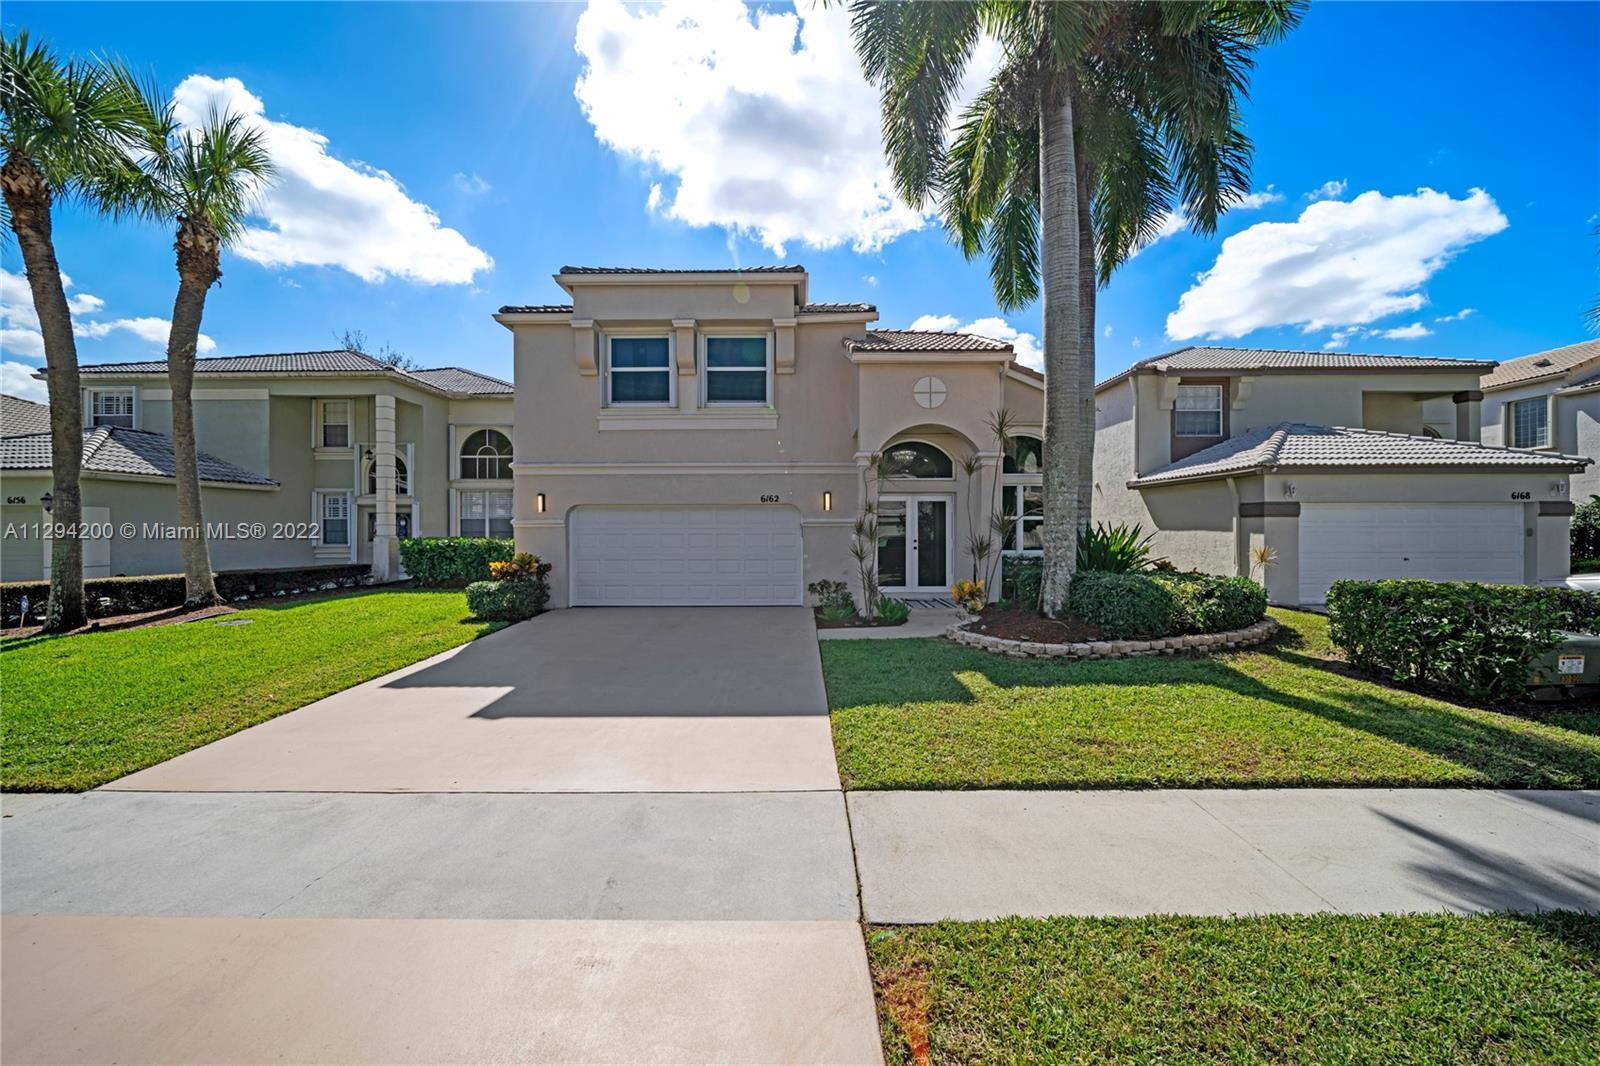 STUNNING!!  4 bedrooms, 3 baths, 2-C garage 2 story single family home in gated community. One bedro